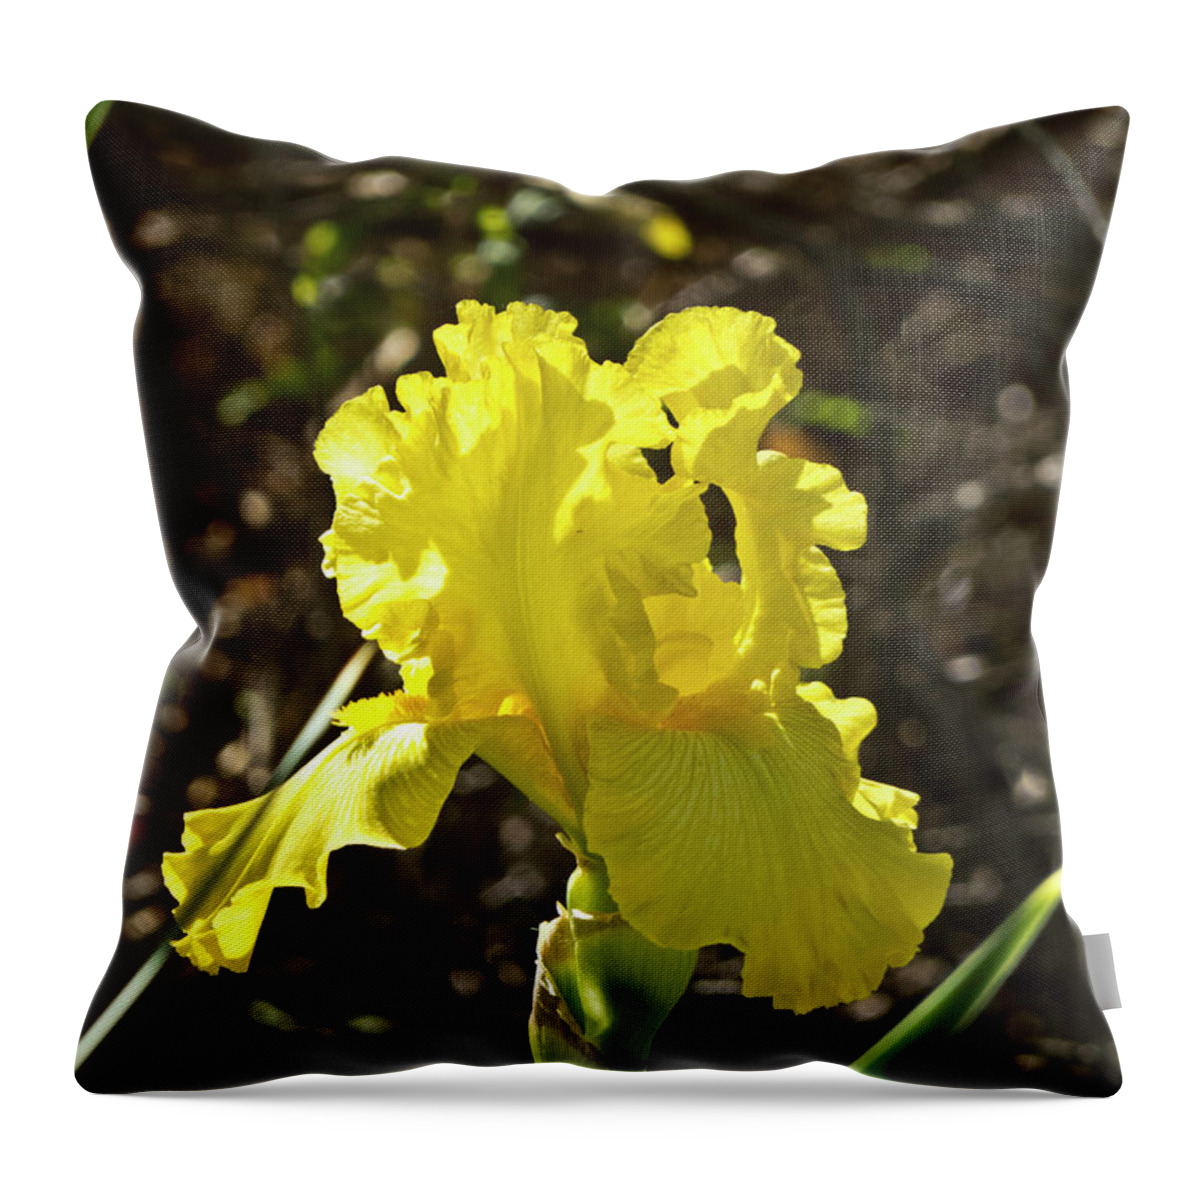 Boyce Thompson Arboretum Throw Pillow featuring the photograph Bright Yellow in the Sun by Kathy McClure